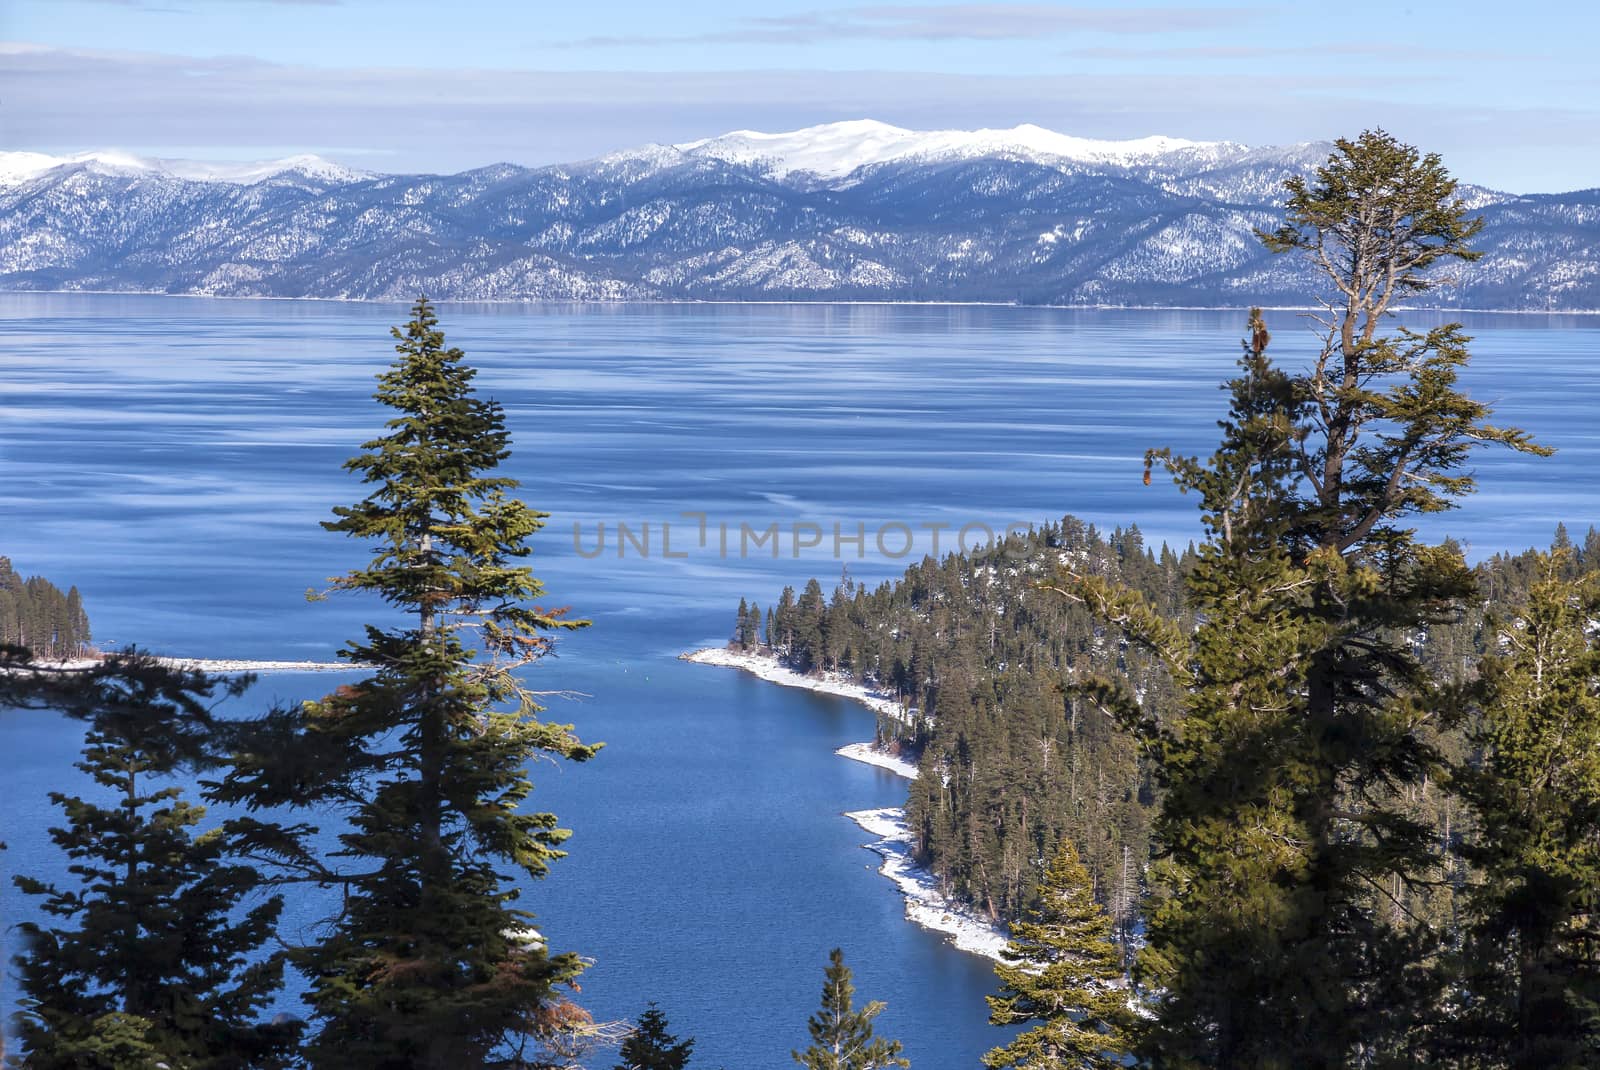 This is a winter image taken at Emerald Bay, overlooking Southern part of Lake Tahoe. The large snow capped mountain in the distance is Genoa peak.